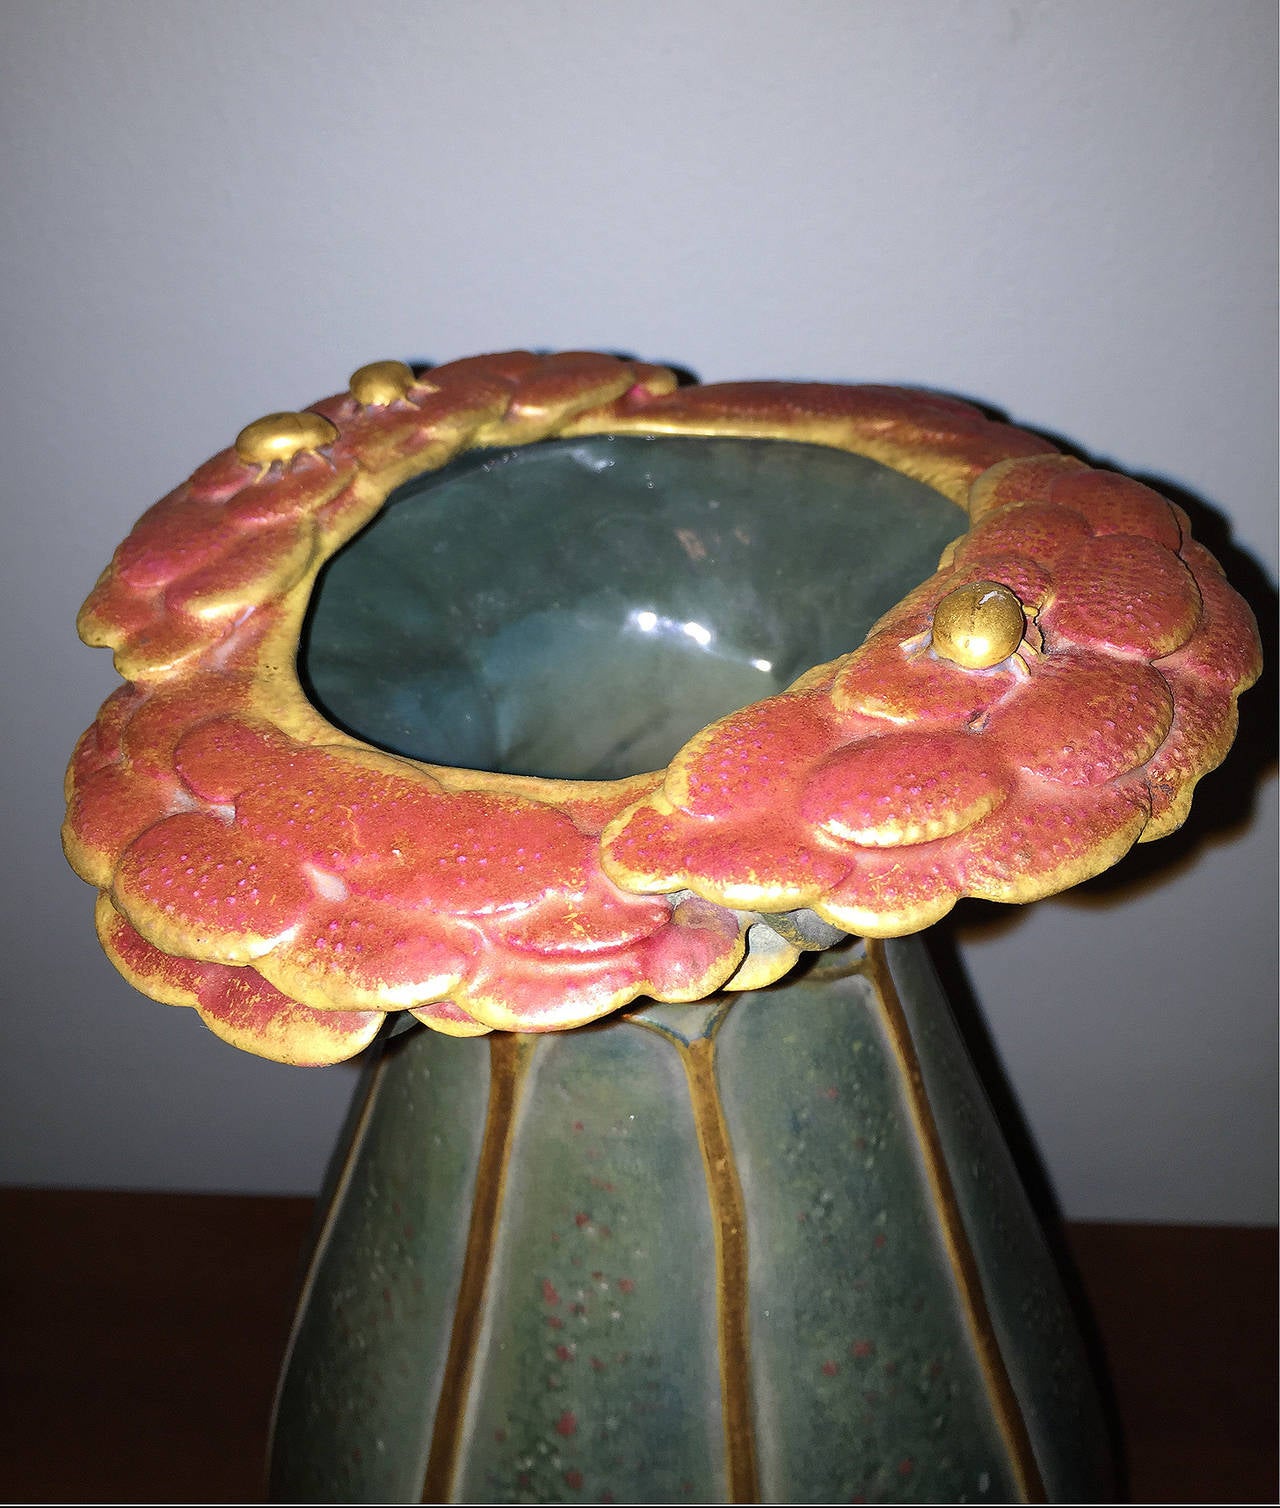 A highly desirable and rare (with red) Amphora hard earthenware and iridescent vase with relief leaves and stems. On the mouth is a wreath of umbellates (flowers with pedicels that form a flat cluster, carrot family) with small gold beetles. Hand